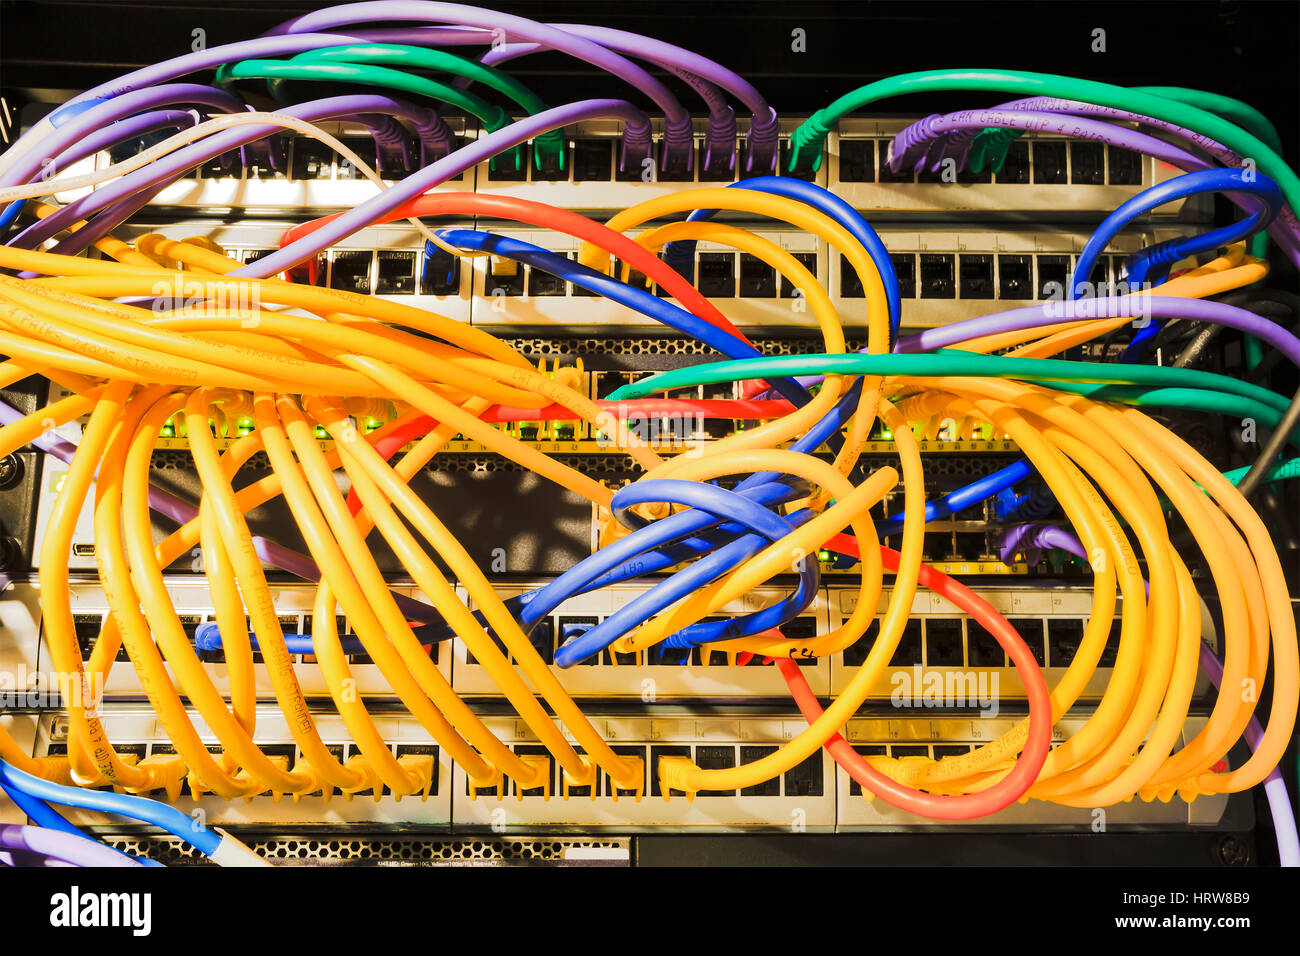 Patch panels, sockets, patch cables connected to the network equipment inside the rack of Data Centre. Stock Photo